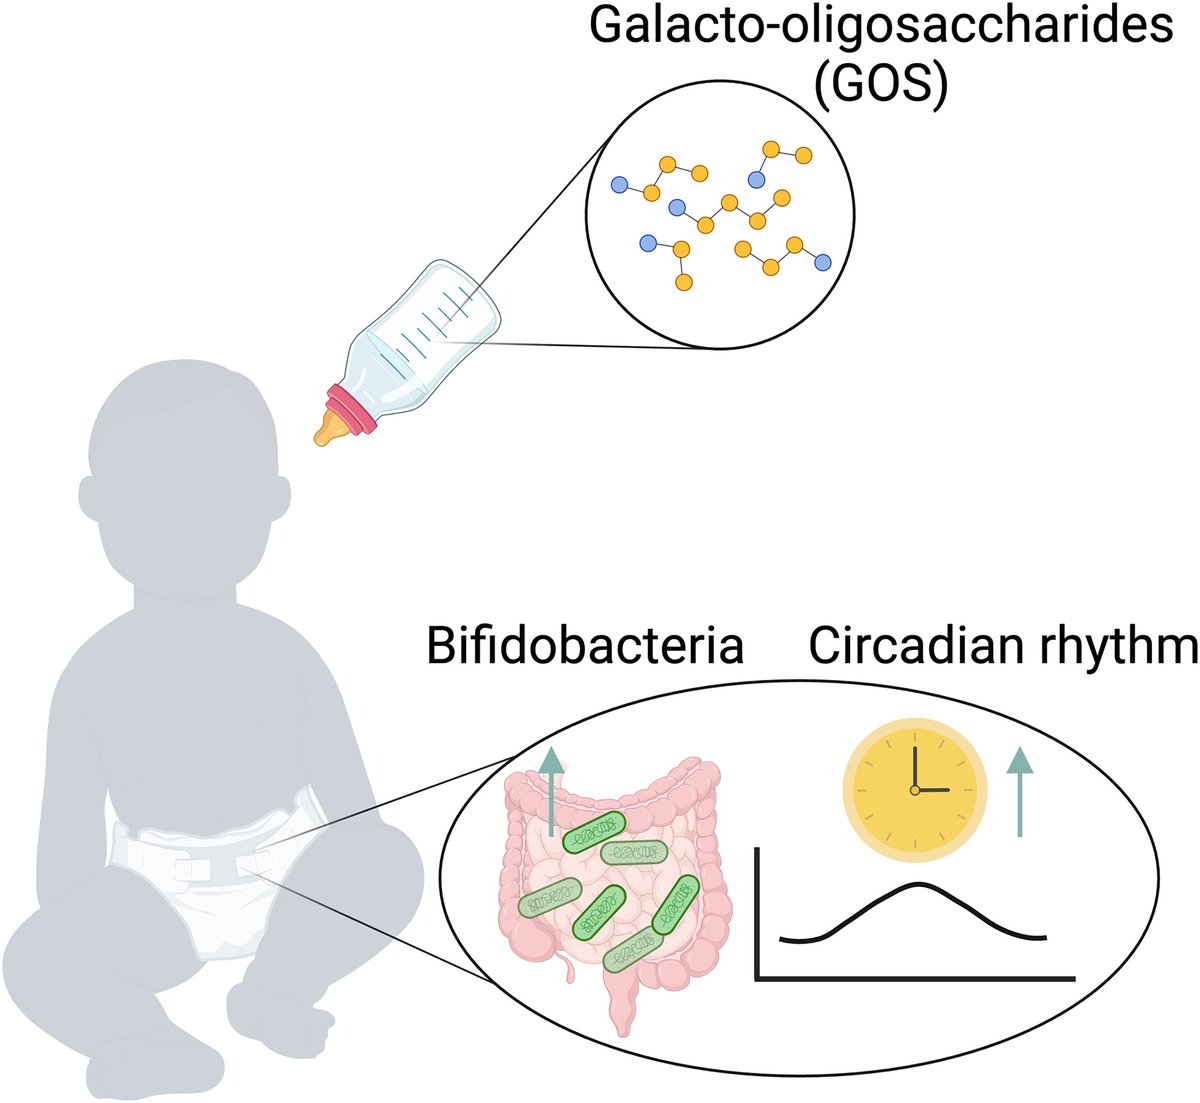 GOSpel for tiny allies. Hu @YaleIBIO and Yu @ FDU highlight recent work presenting a clinical trial examining the impact of formula supplementation on the development and circadian rhythmicity of the #microbiota during the first year of life cell.com/cell-host-micr…